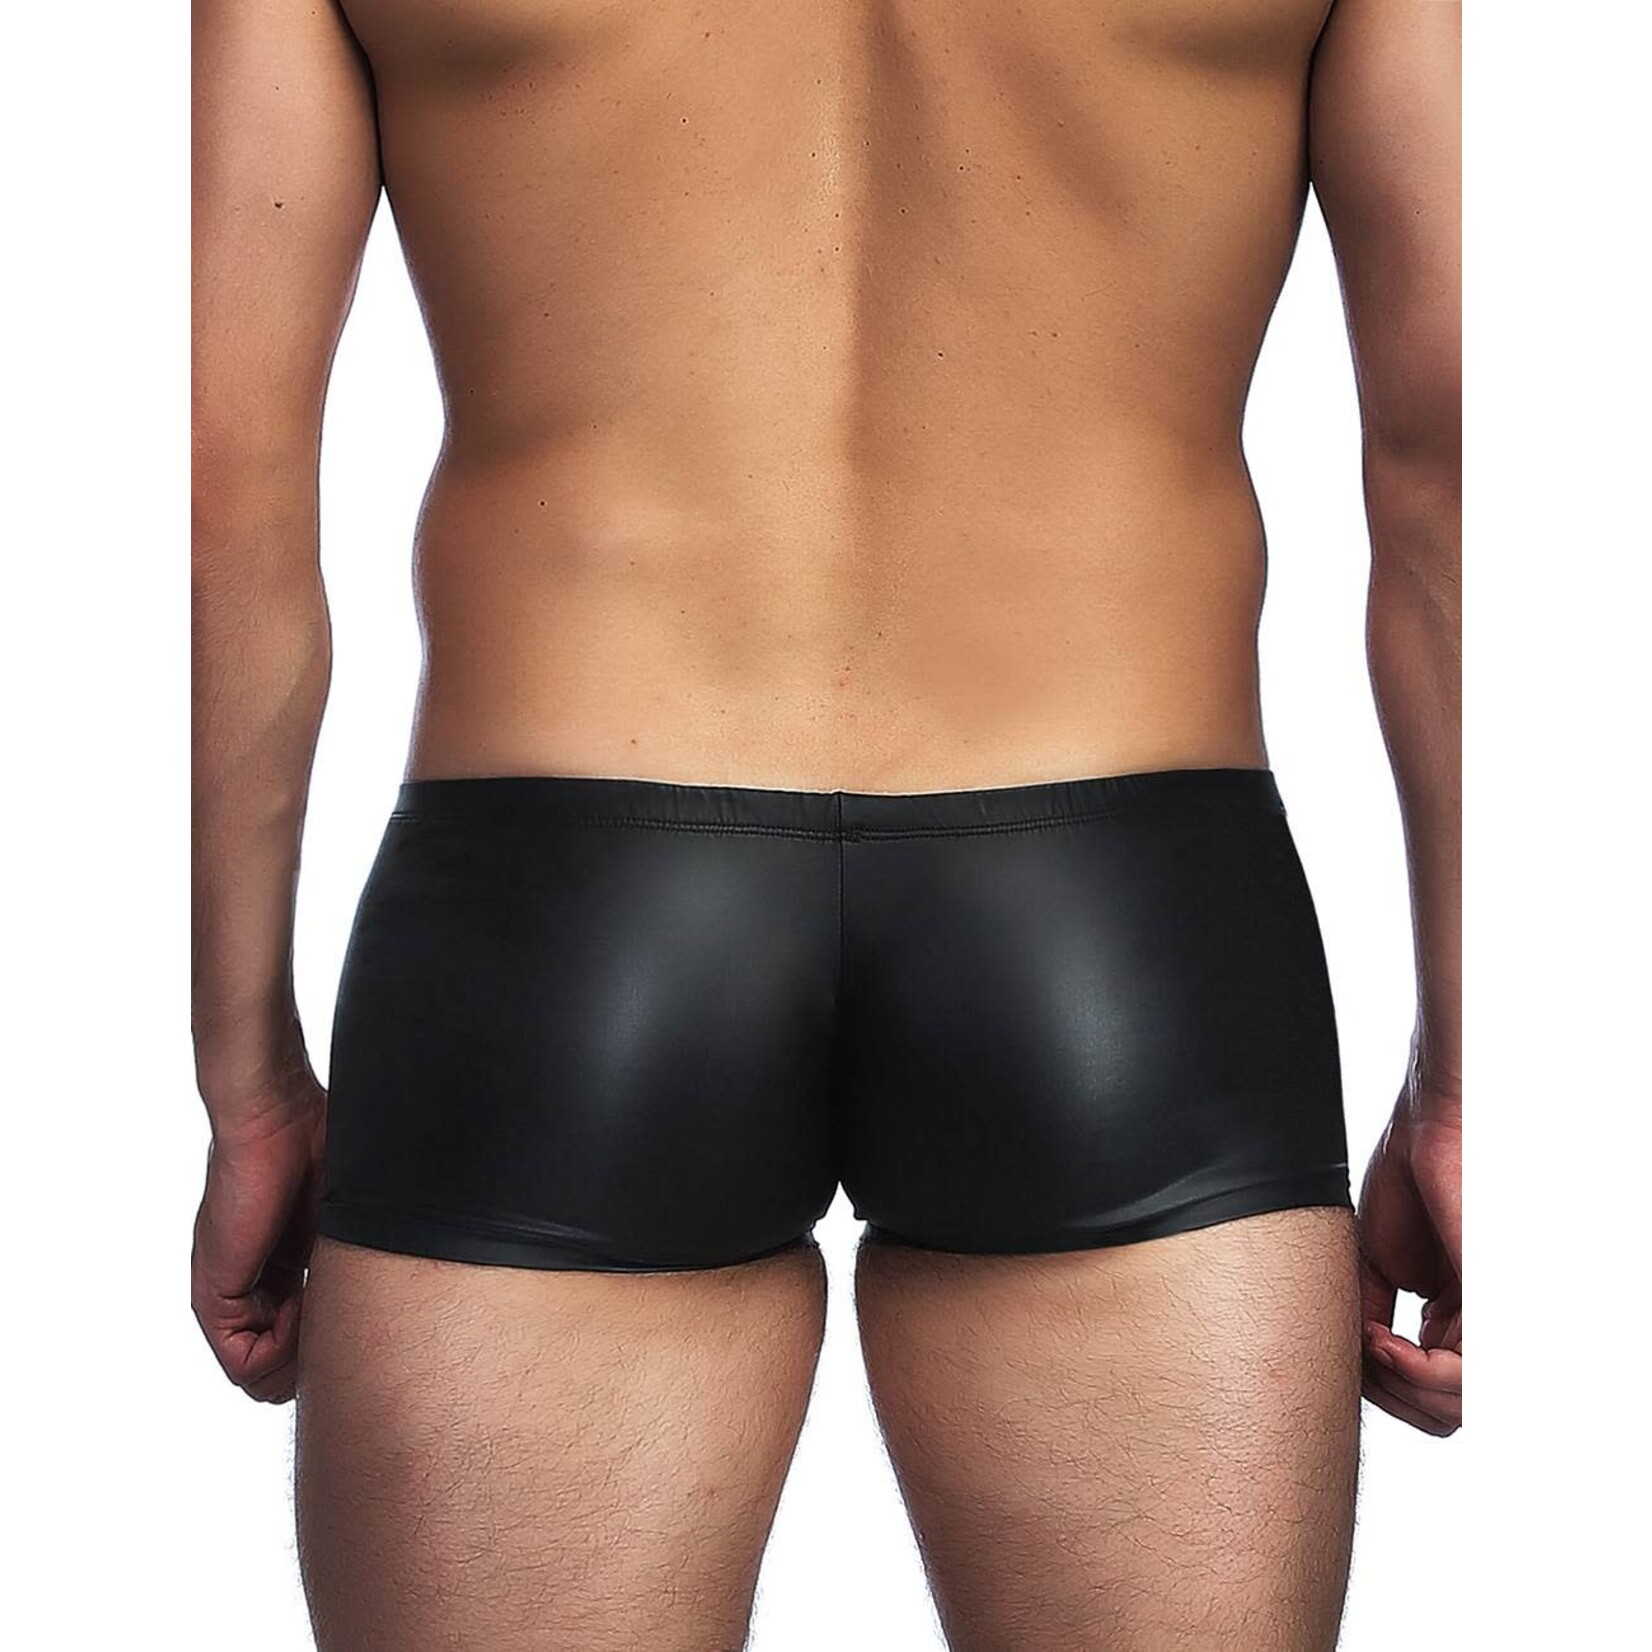 OH YEAH! -  BLACK LEATHER SEXY PANTY FOR MAN M